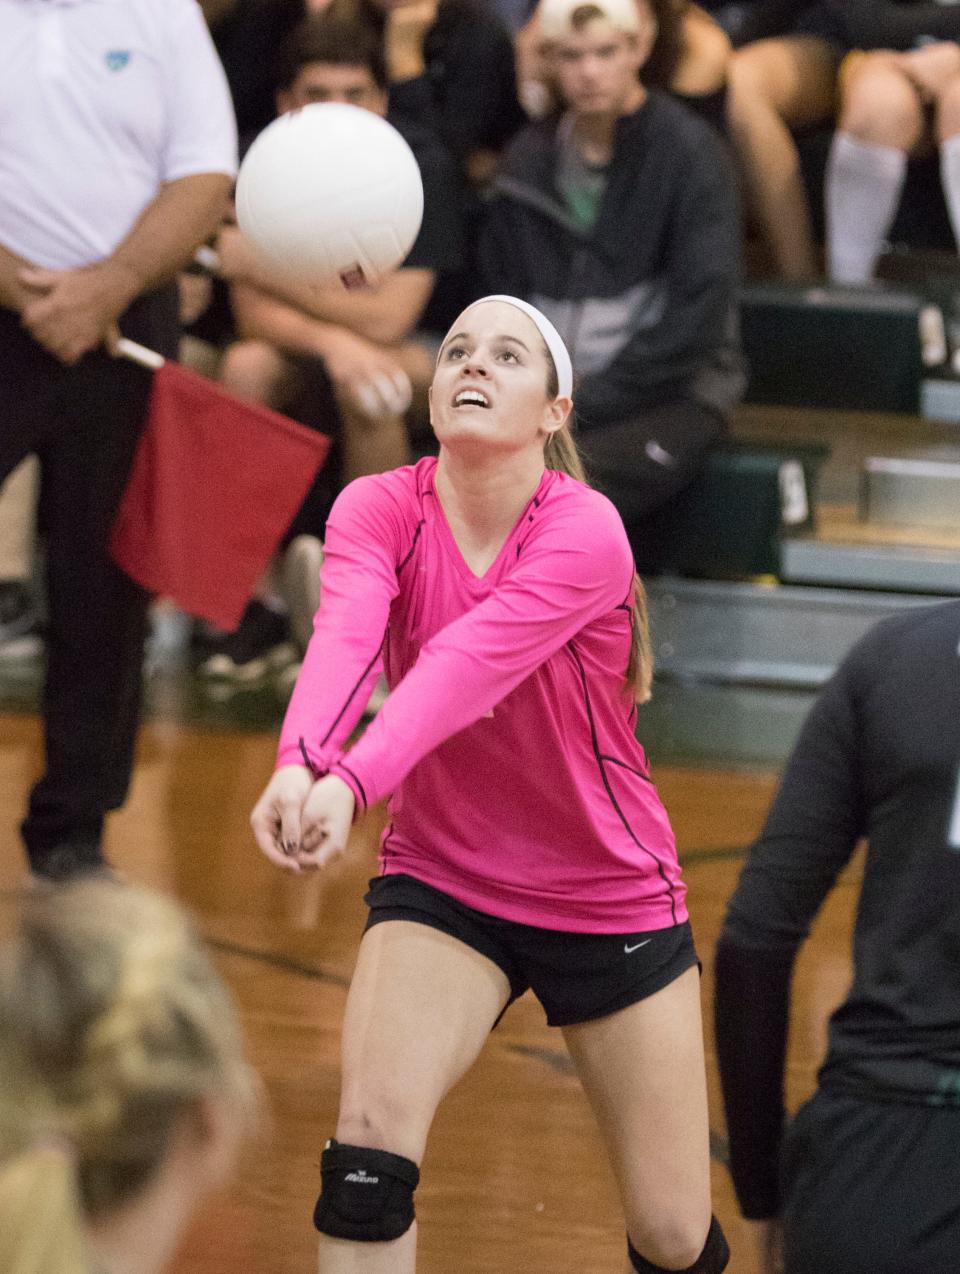 Kayla Carrell (1) hits the ball during the volleyball match against Bolles at Catholic High School in Pensacola on Tuesday, November 1, 2016.